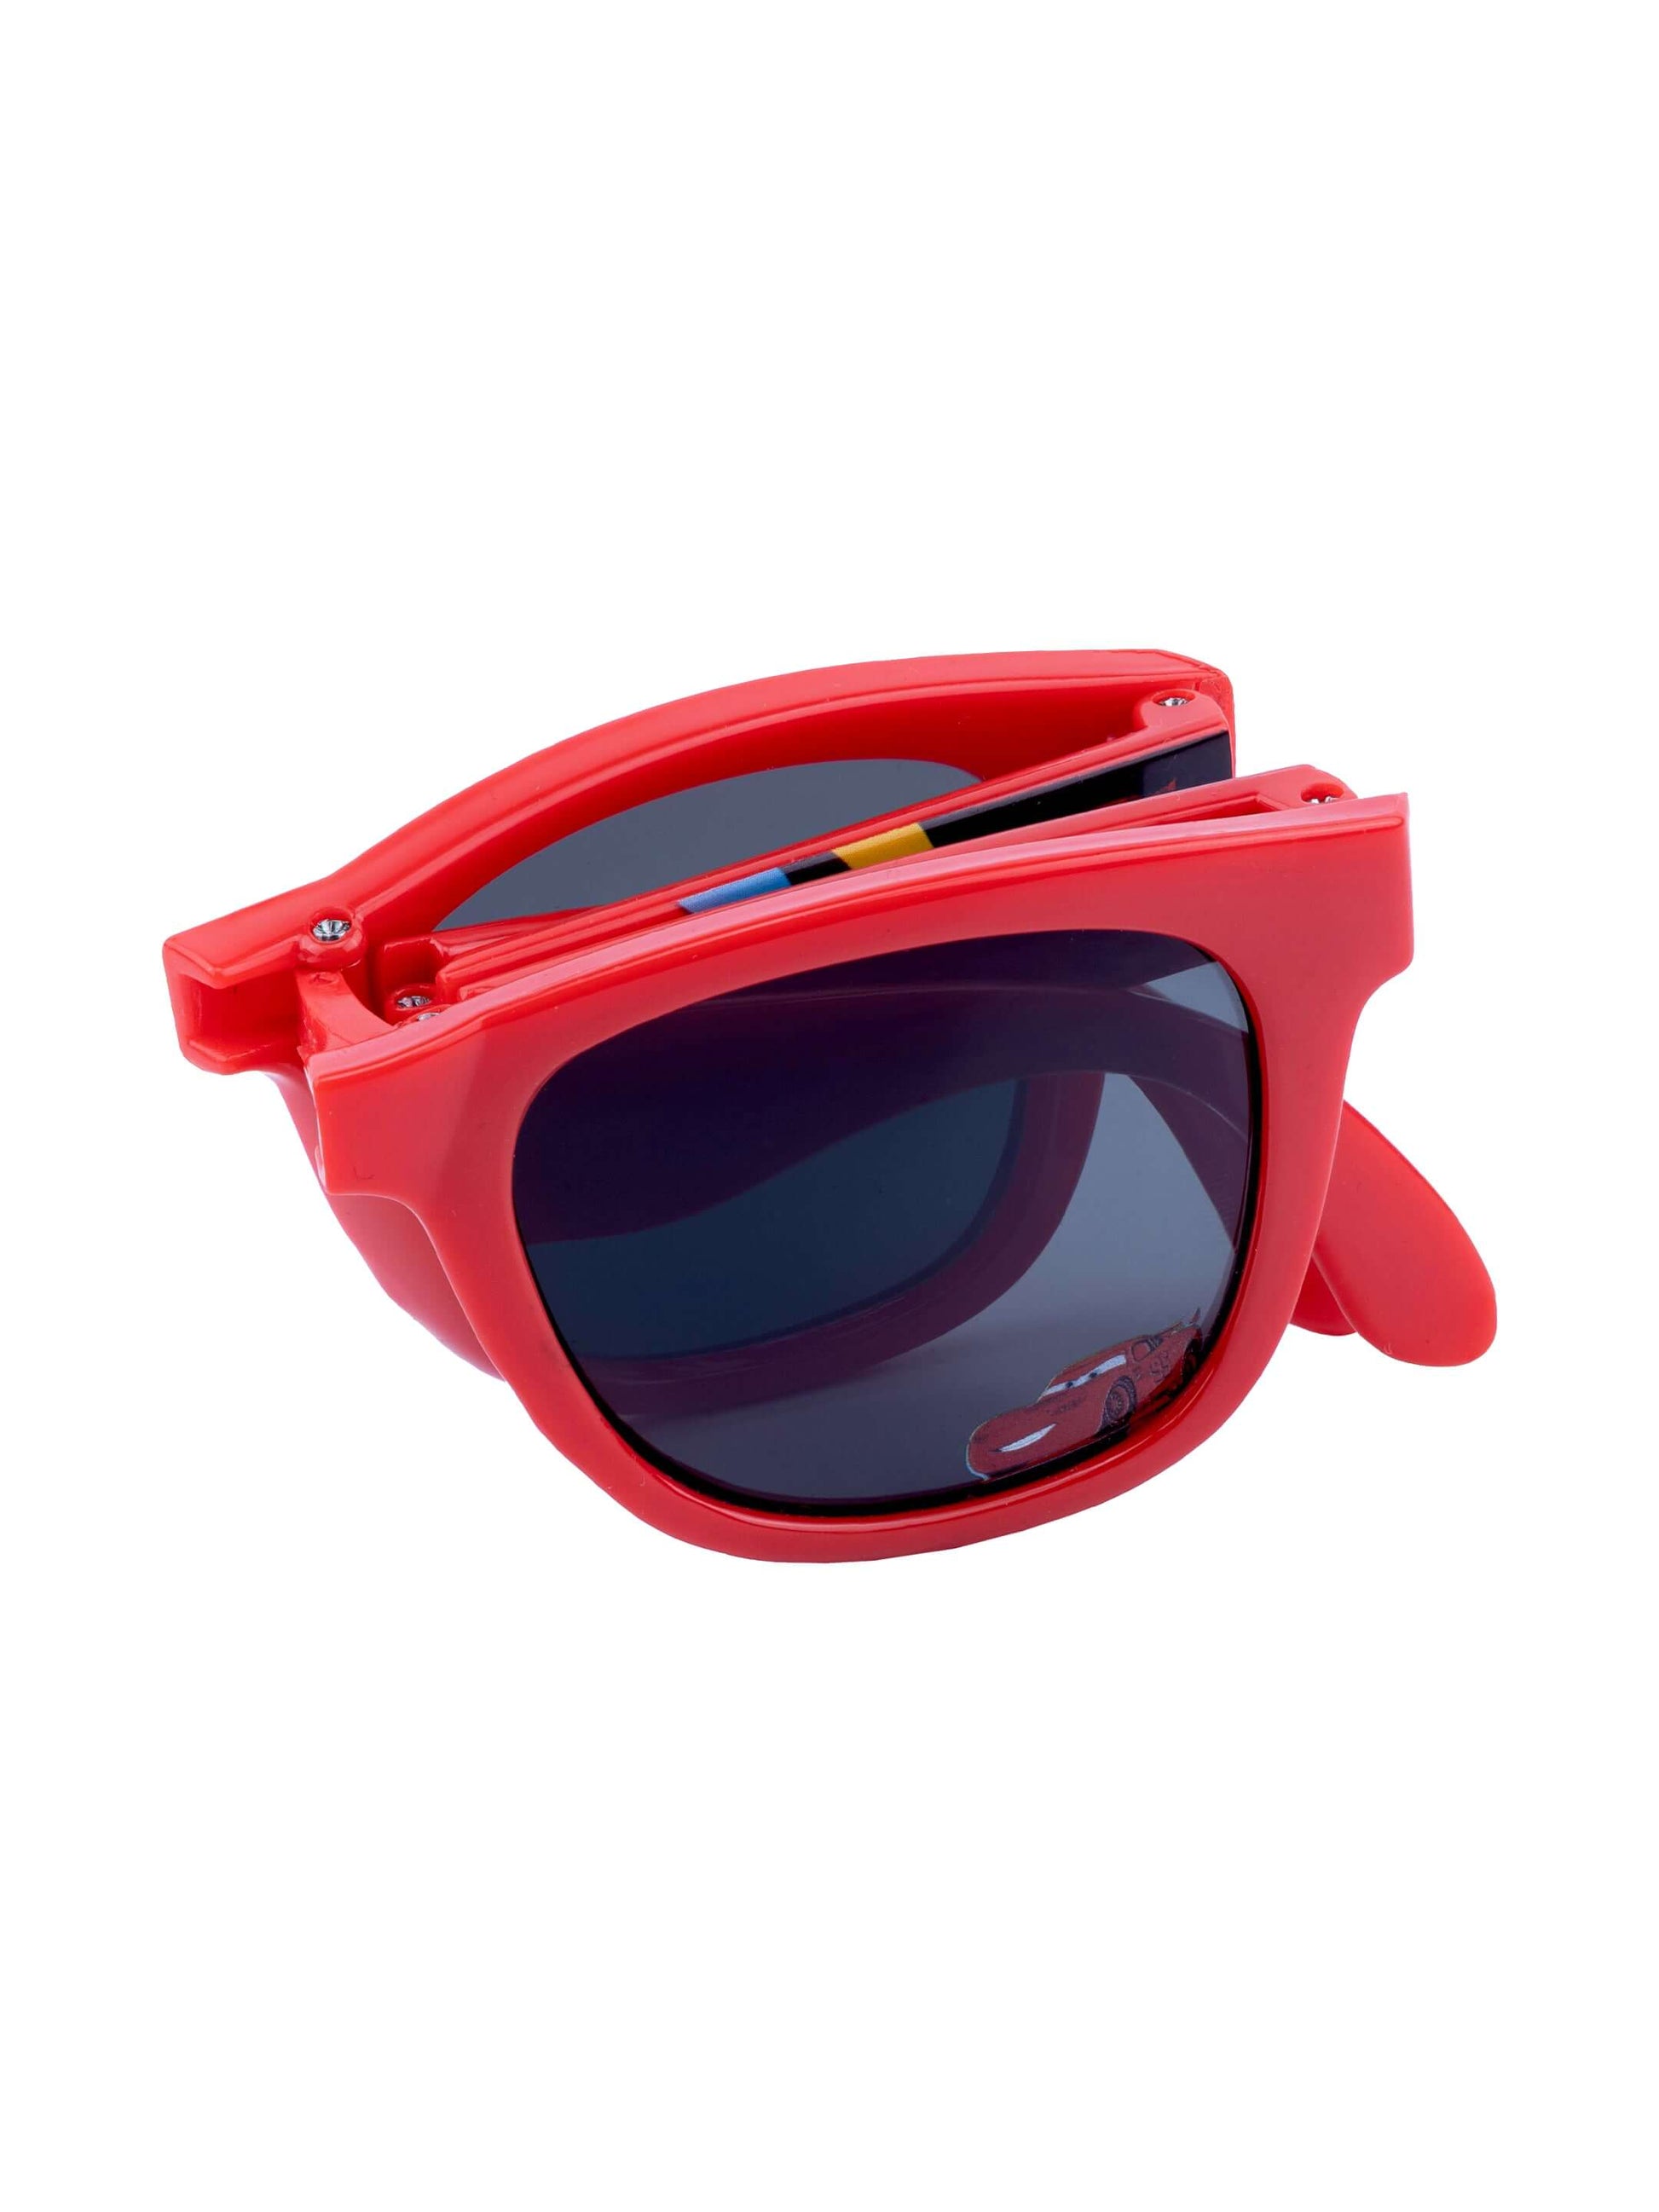 Disney Cars Sunglasses - Toys4All.in